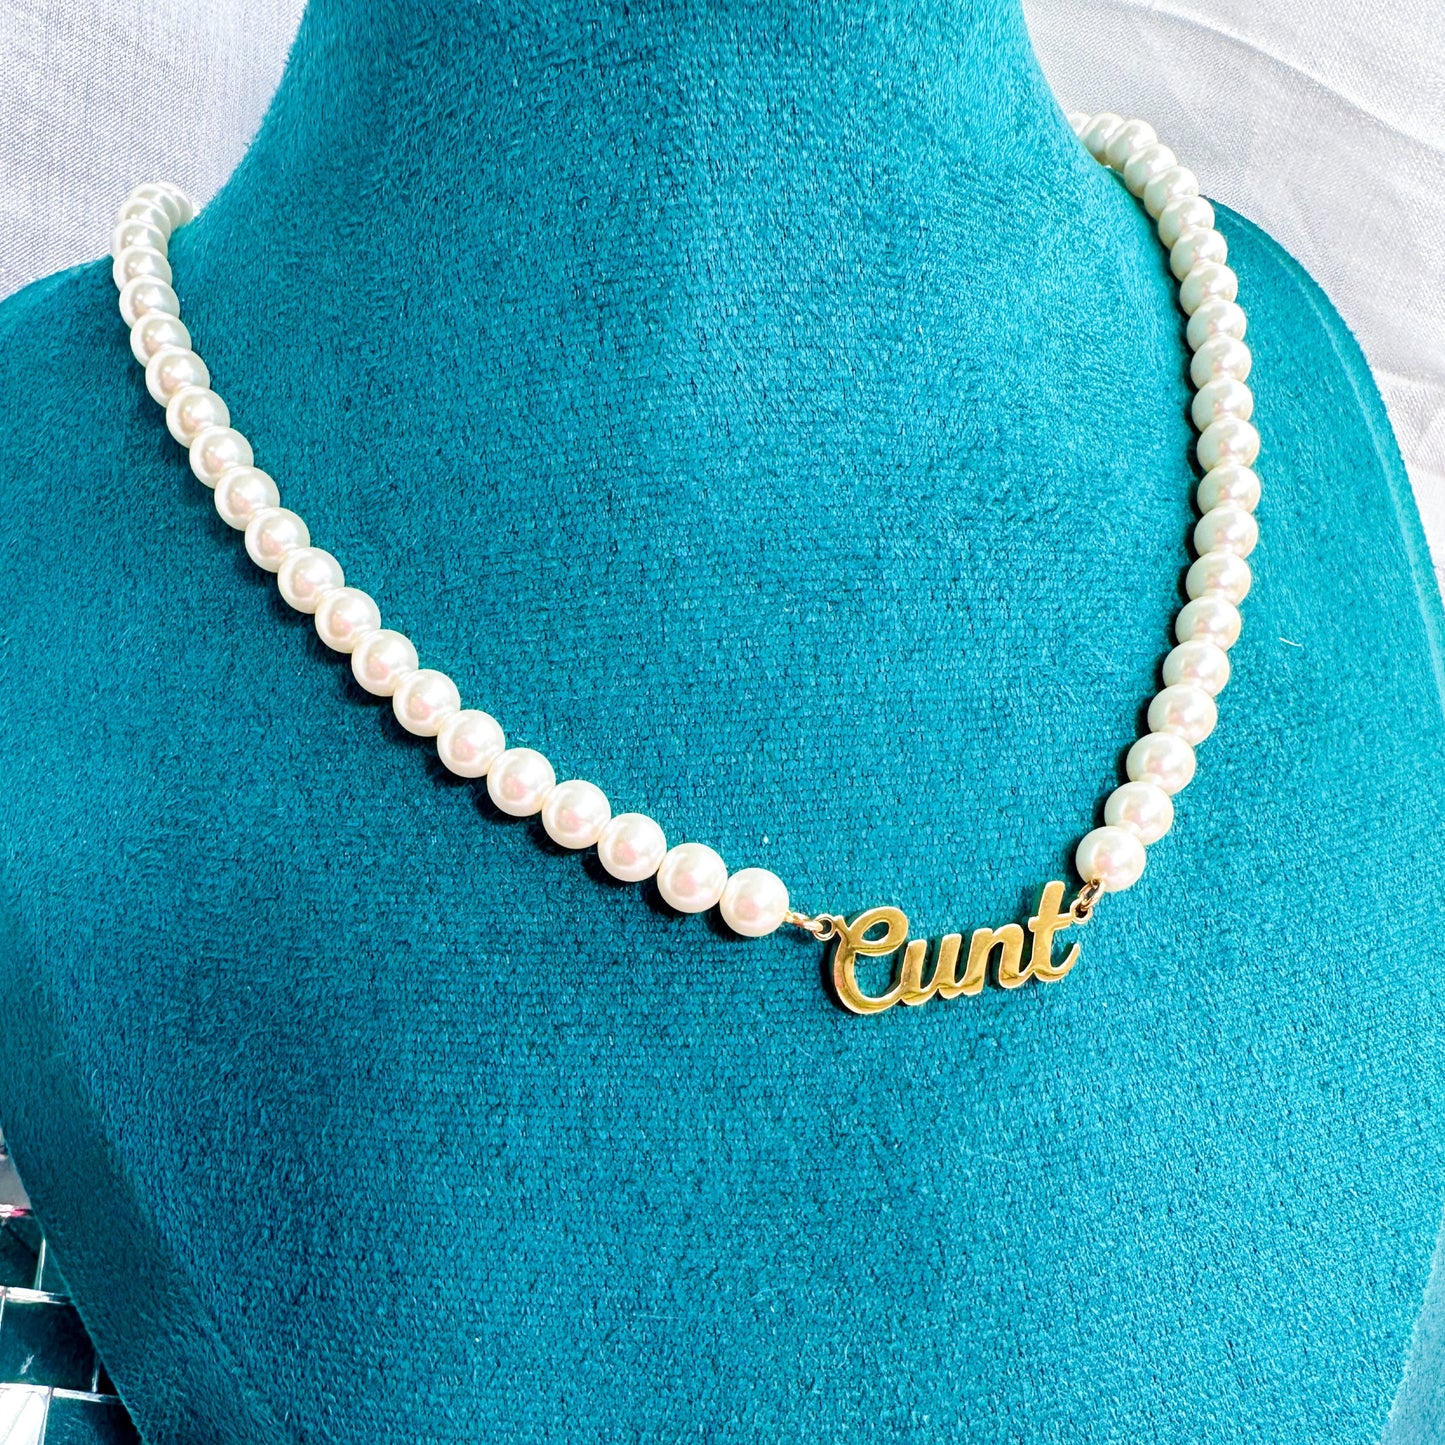 C*nt Pearl Necklace - Gold